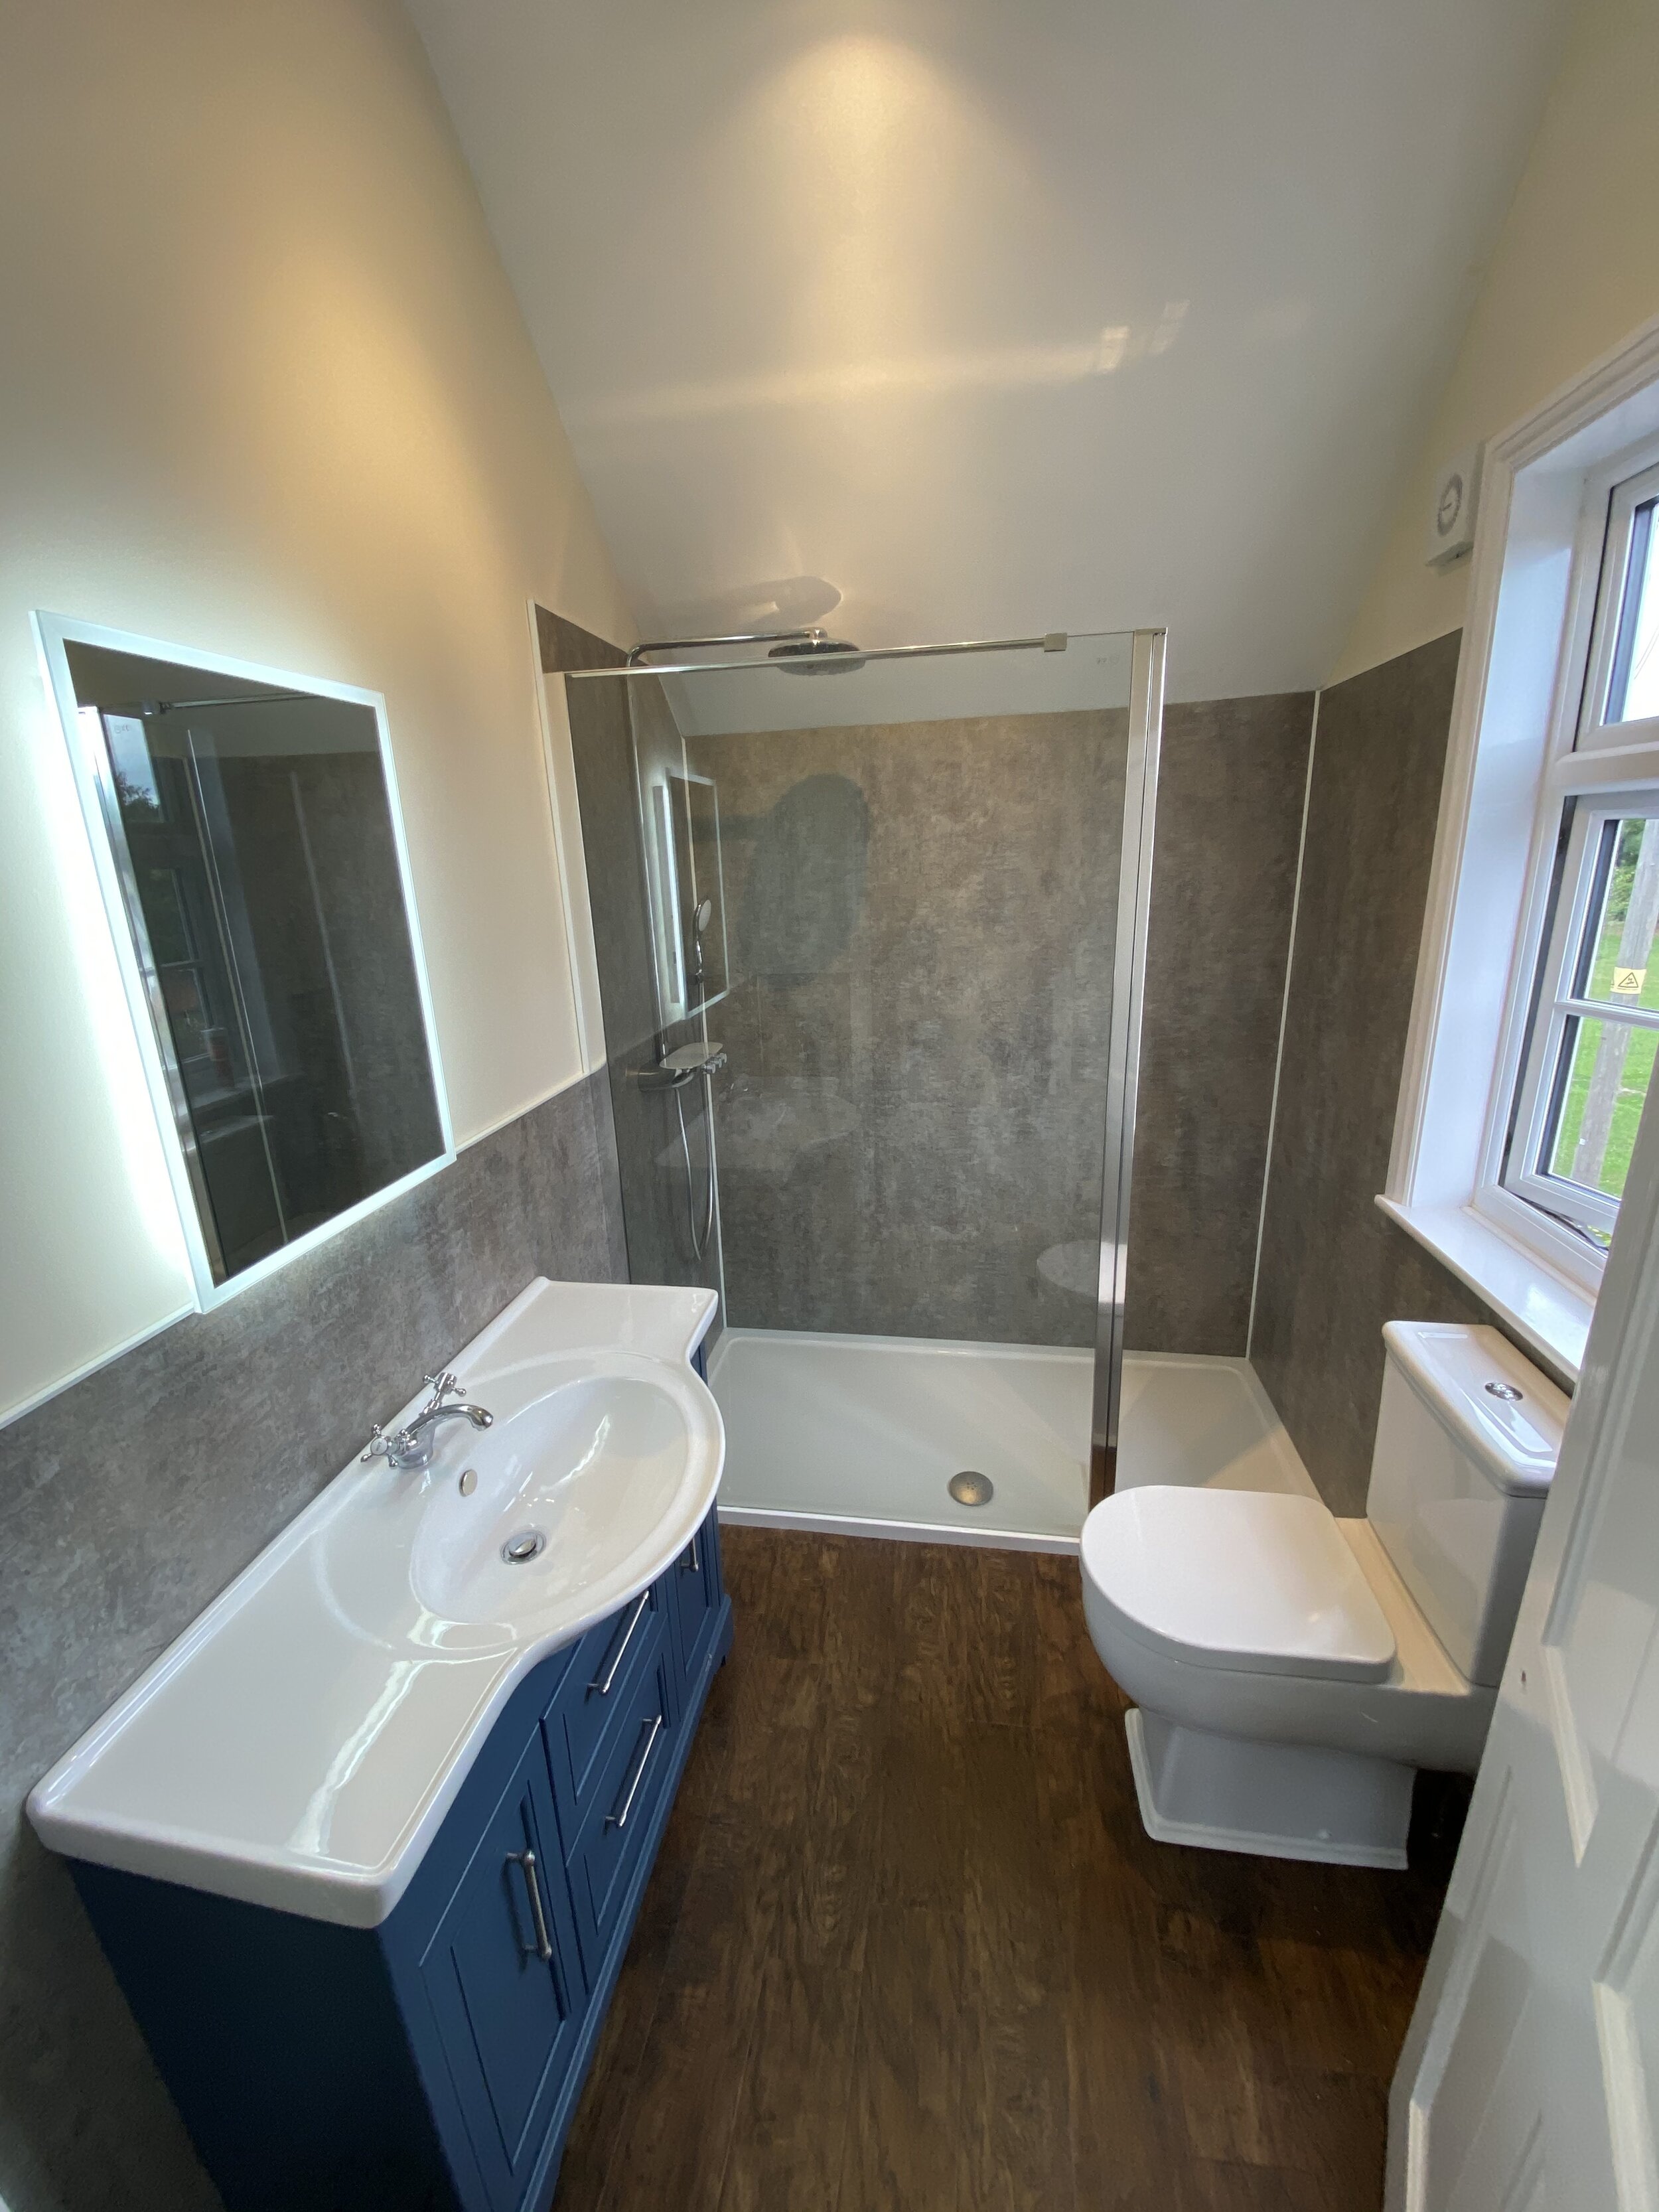 Bathroom installed by Cotswold Vale, featuring a blue wooden base to the sink unit.